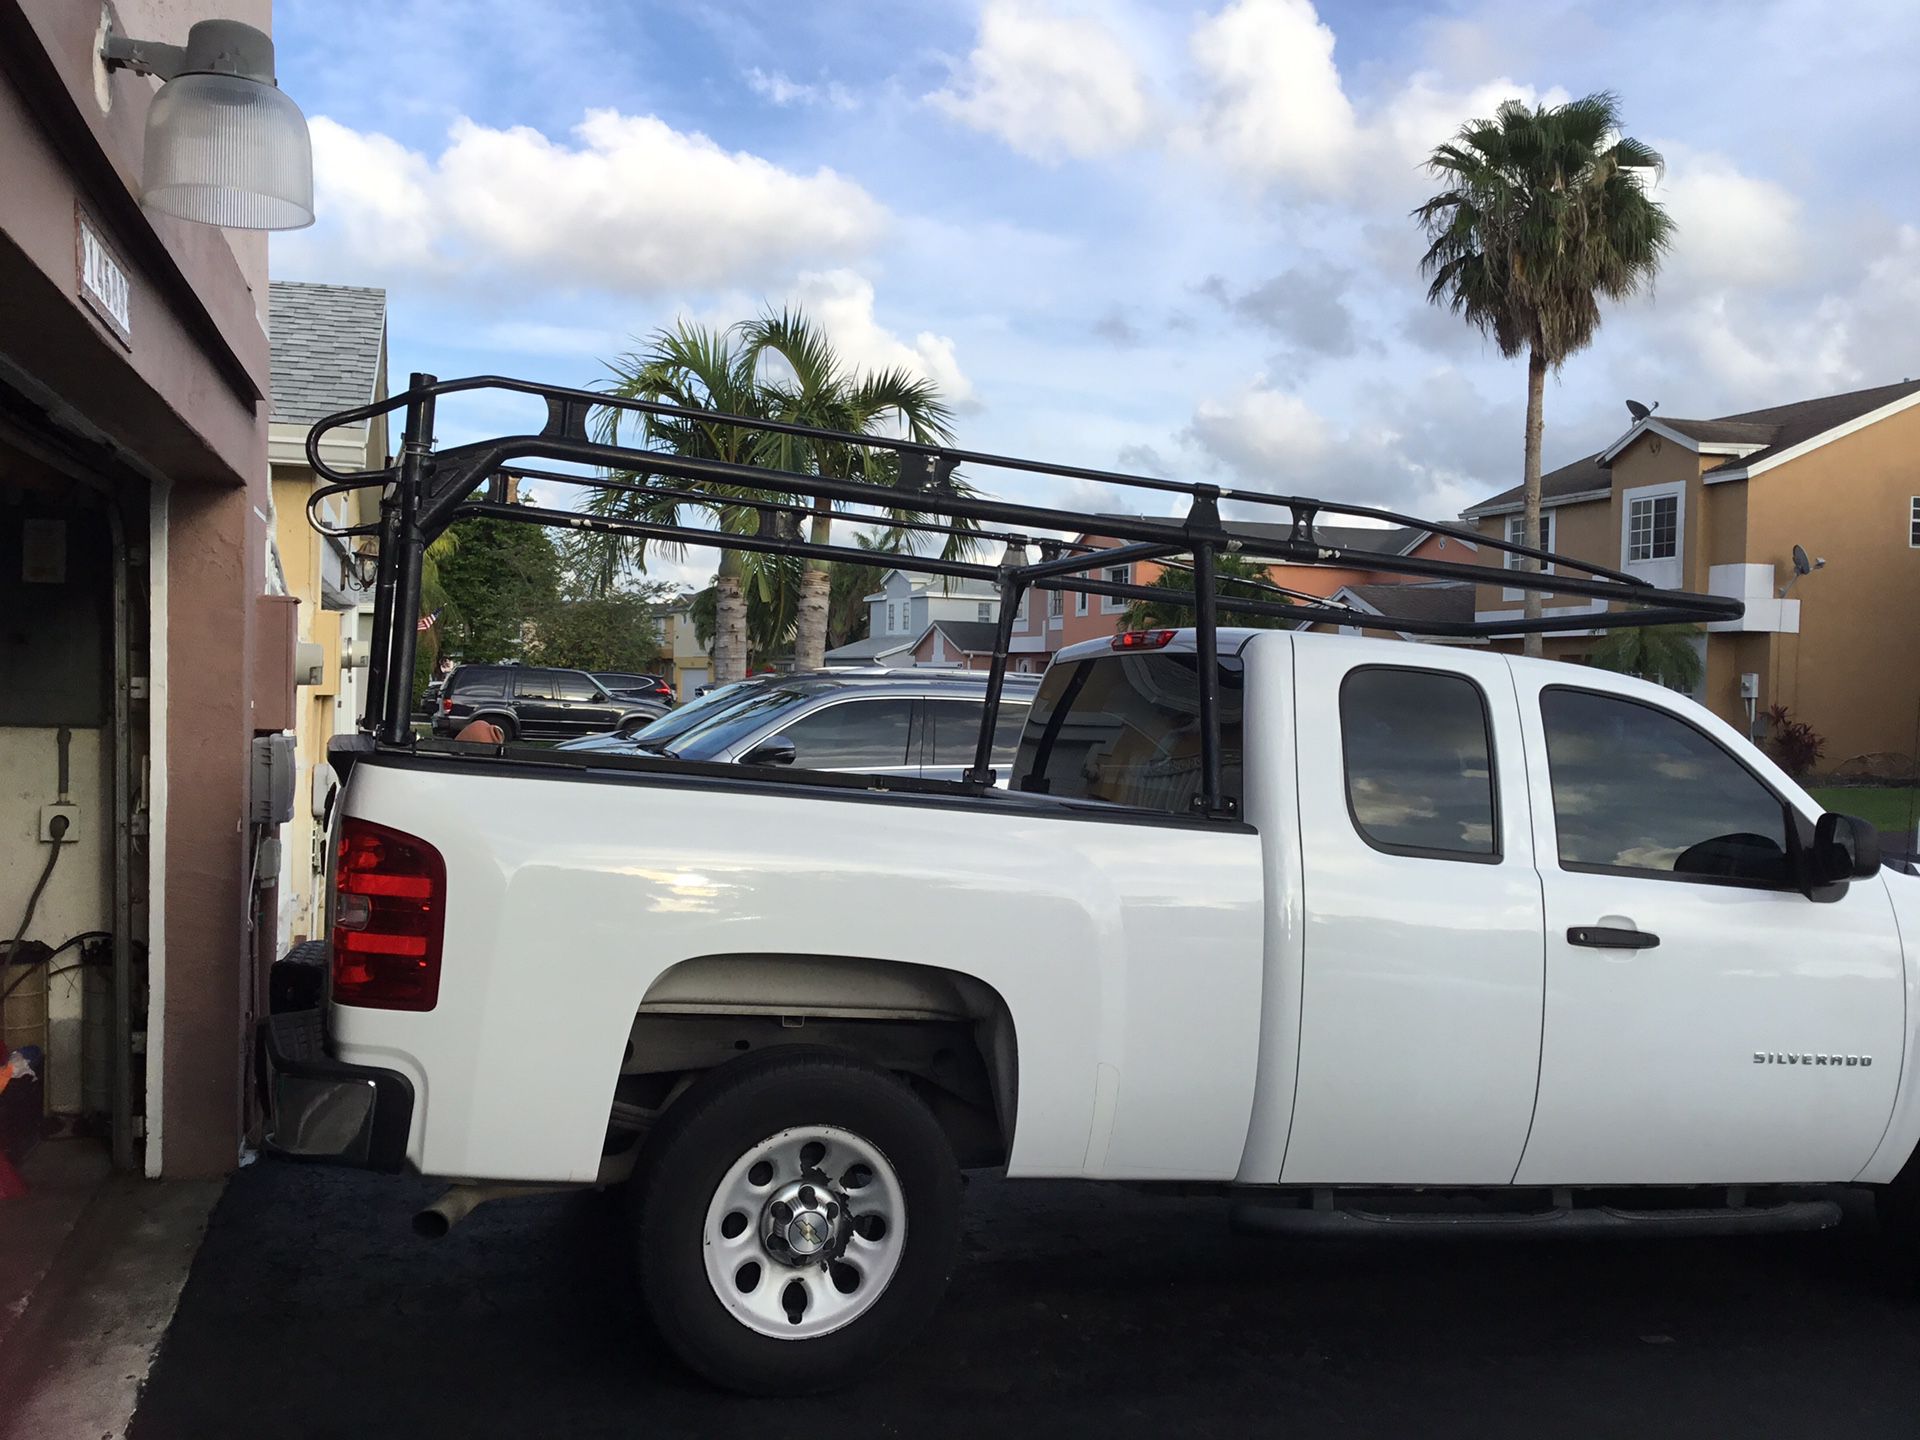 Aluminum ladder rack of my #ilverado clamps down paid $1200 2 yrs ago